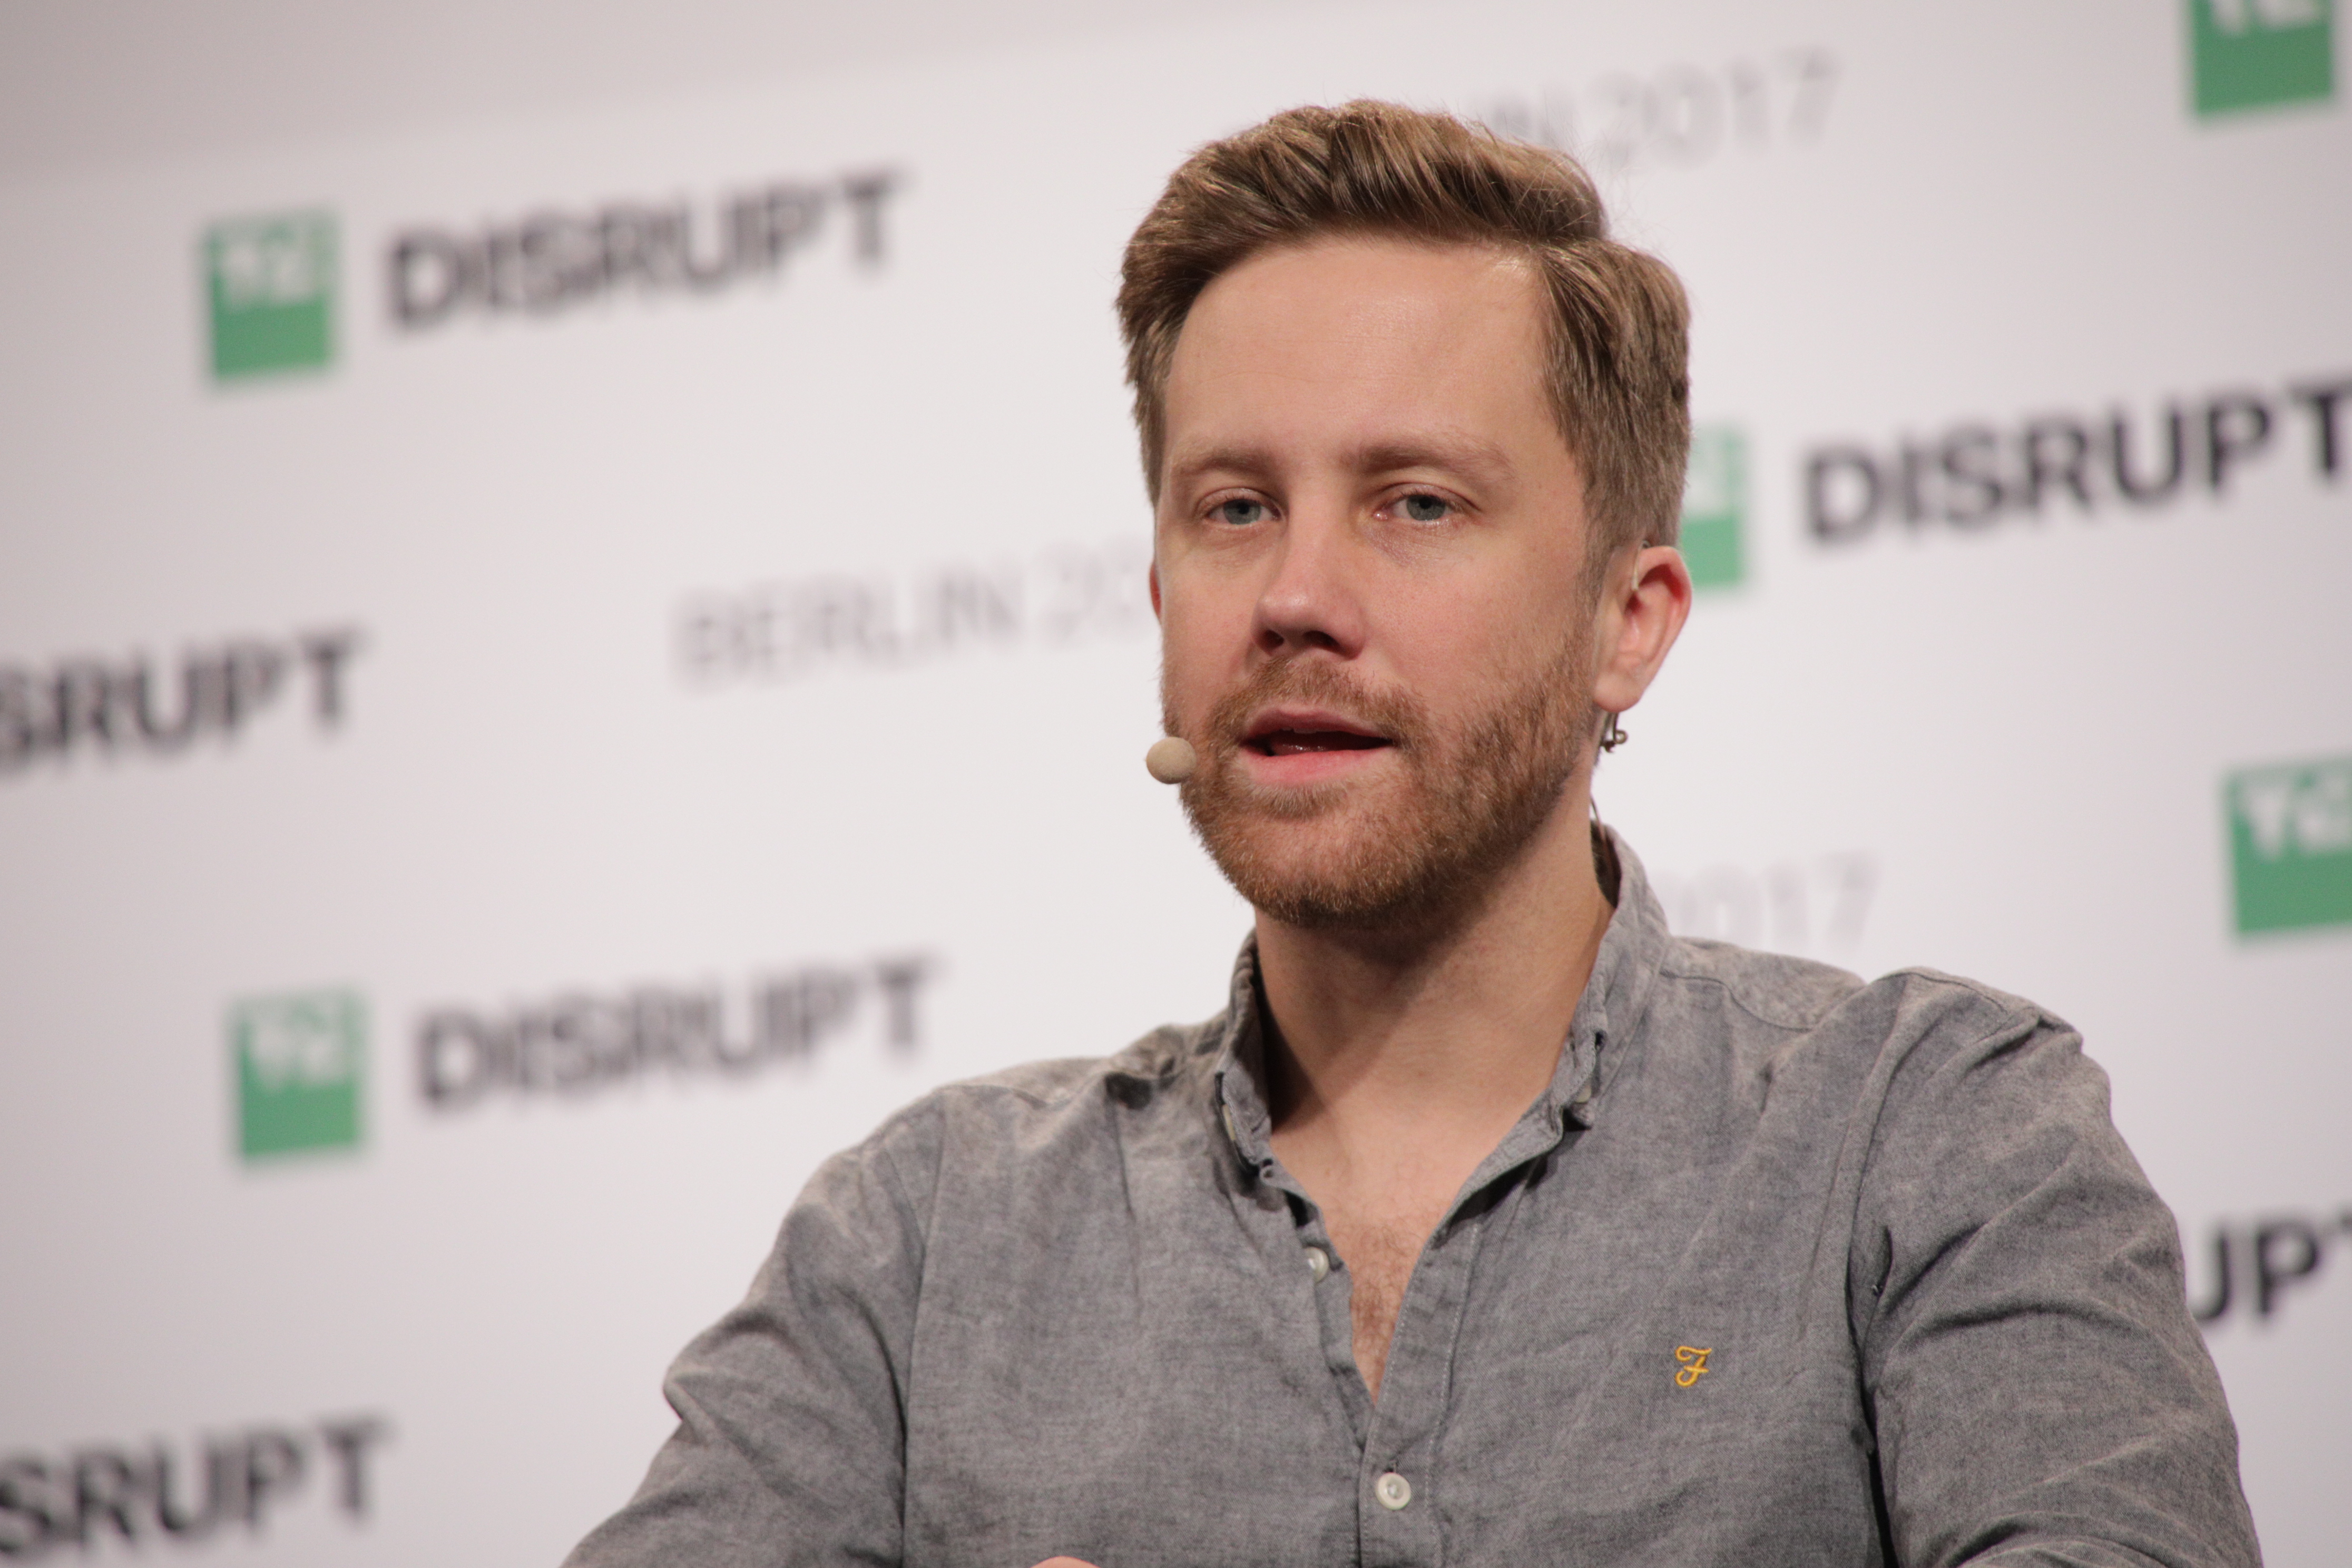 Tom Blomfield takes first board post at Generation Home, after leaving Monzo and Angel investing